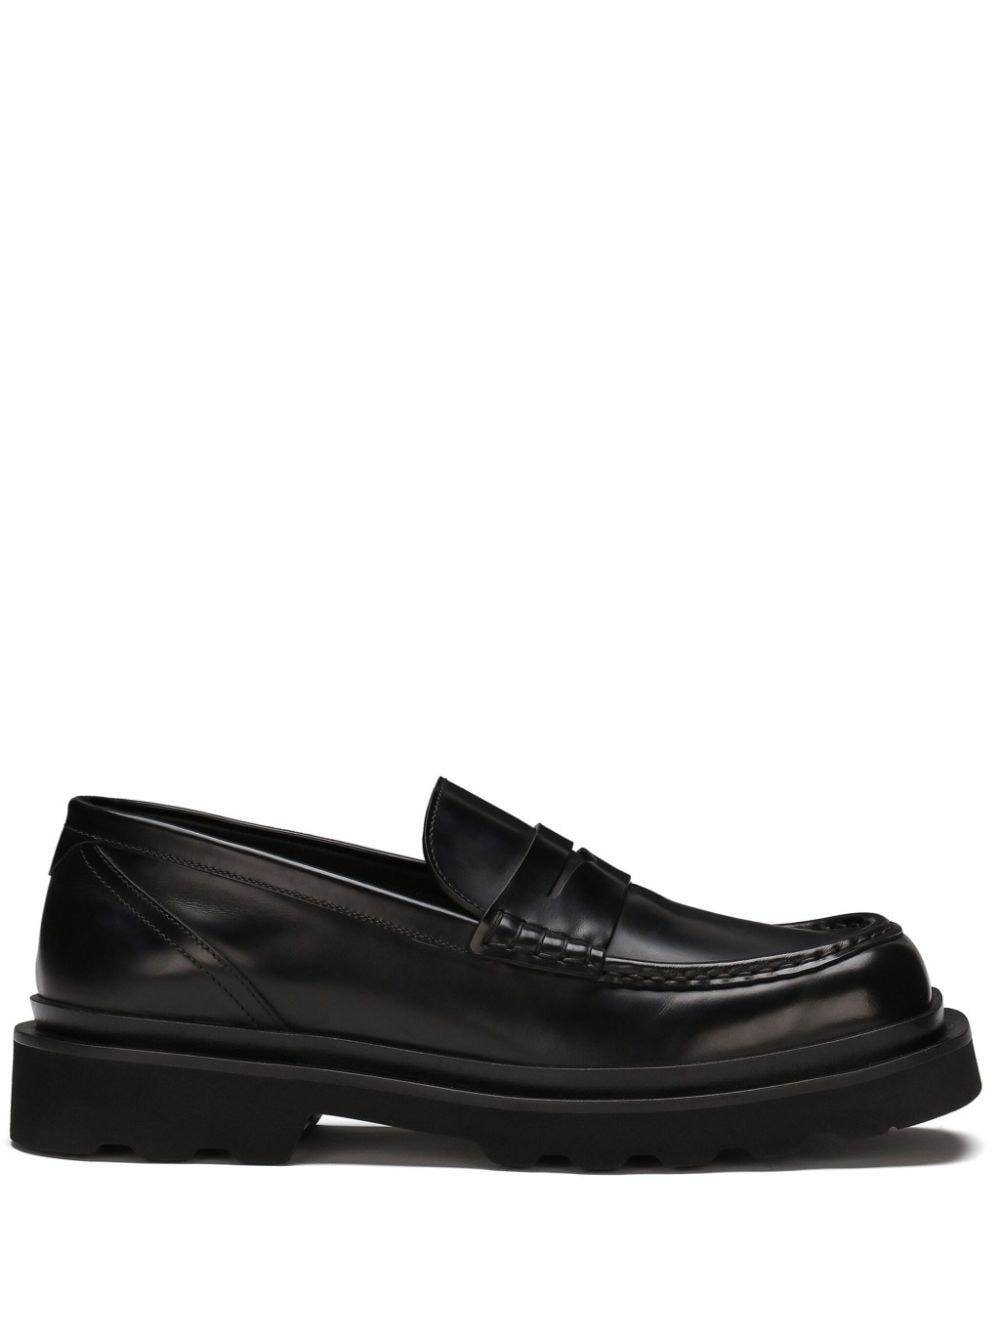 DOLCE & GABBANA PENNY-SLOT LEATHER LOAFERS